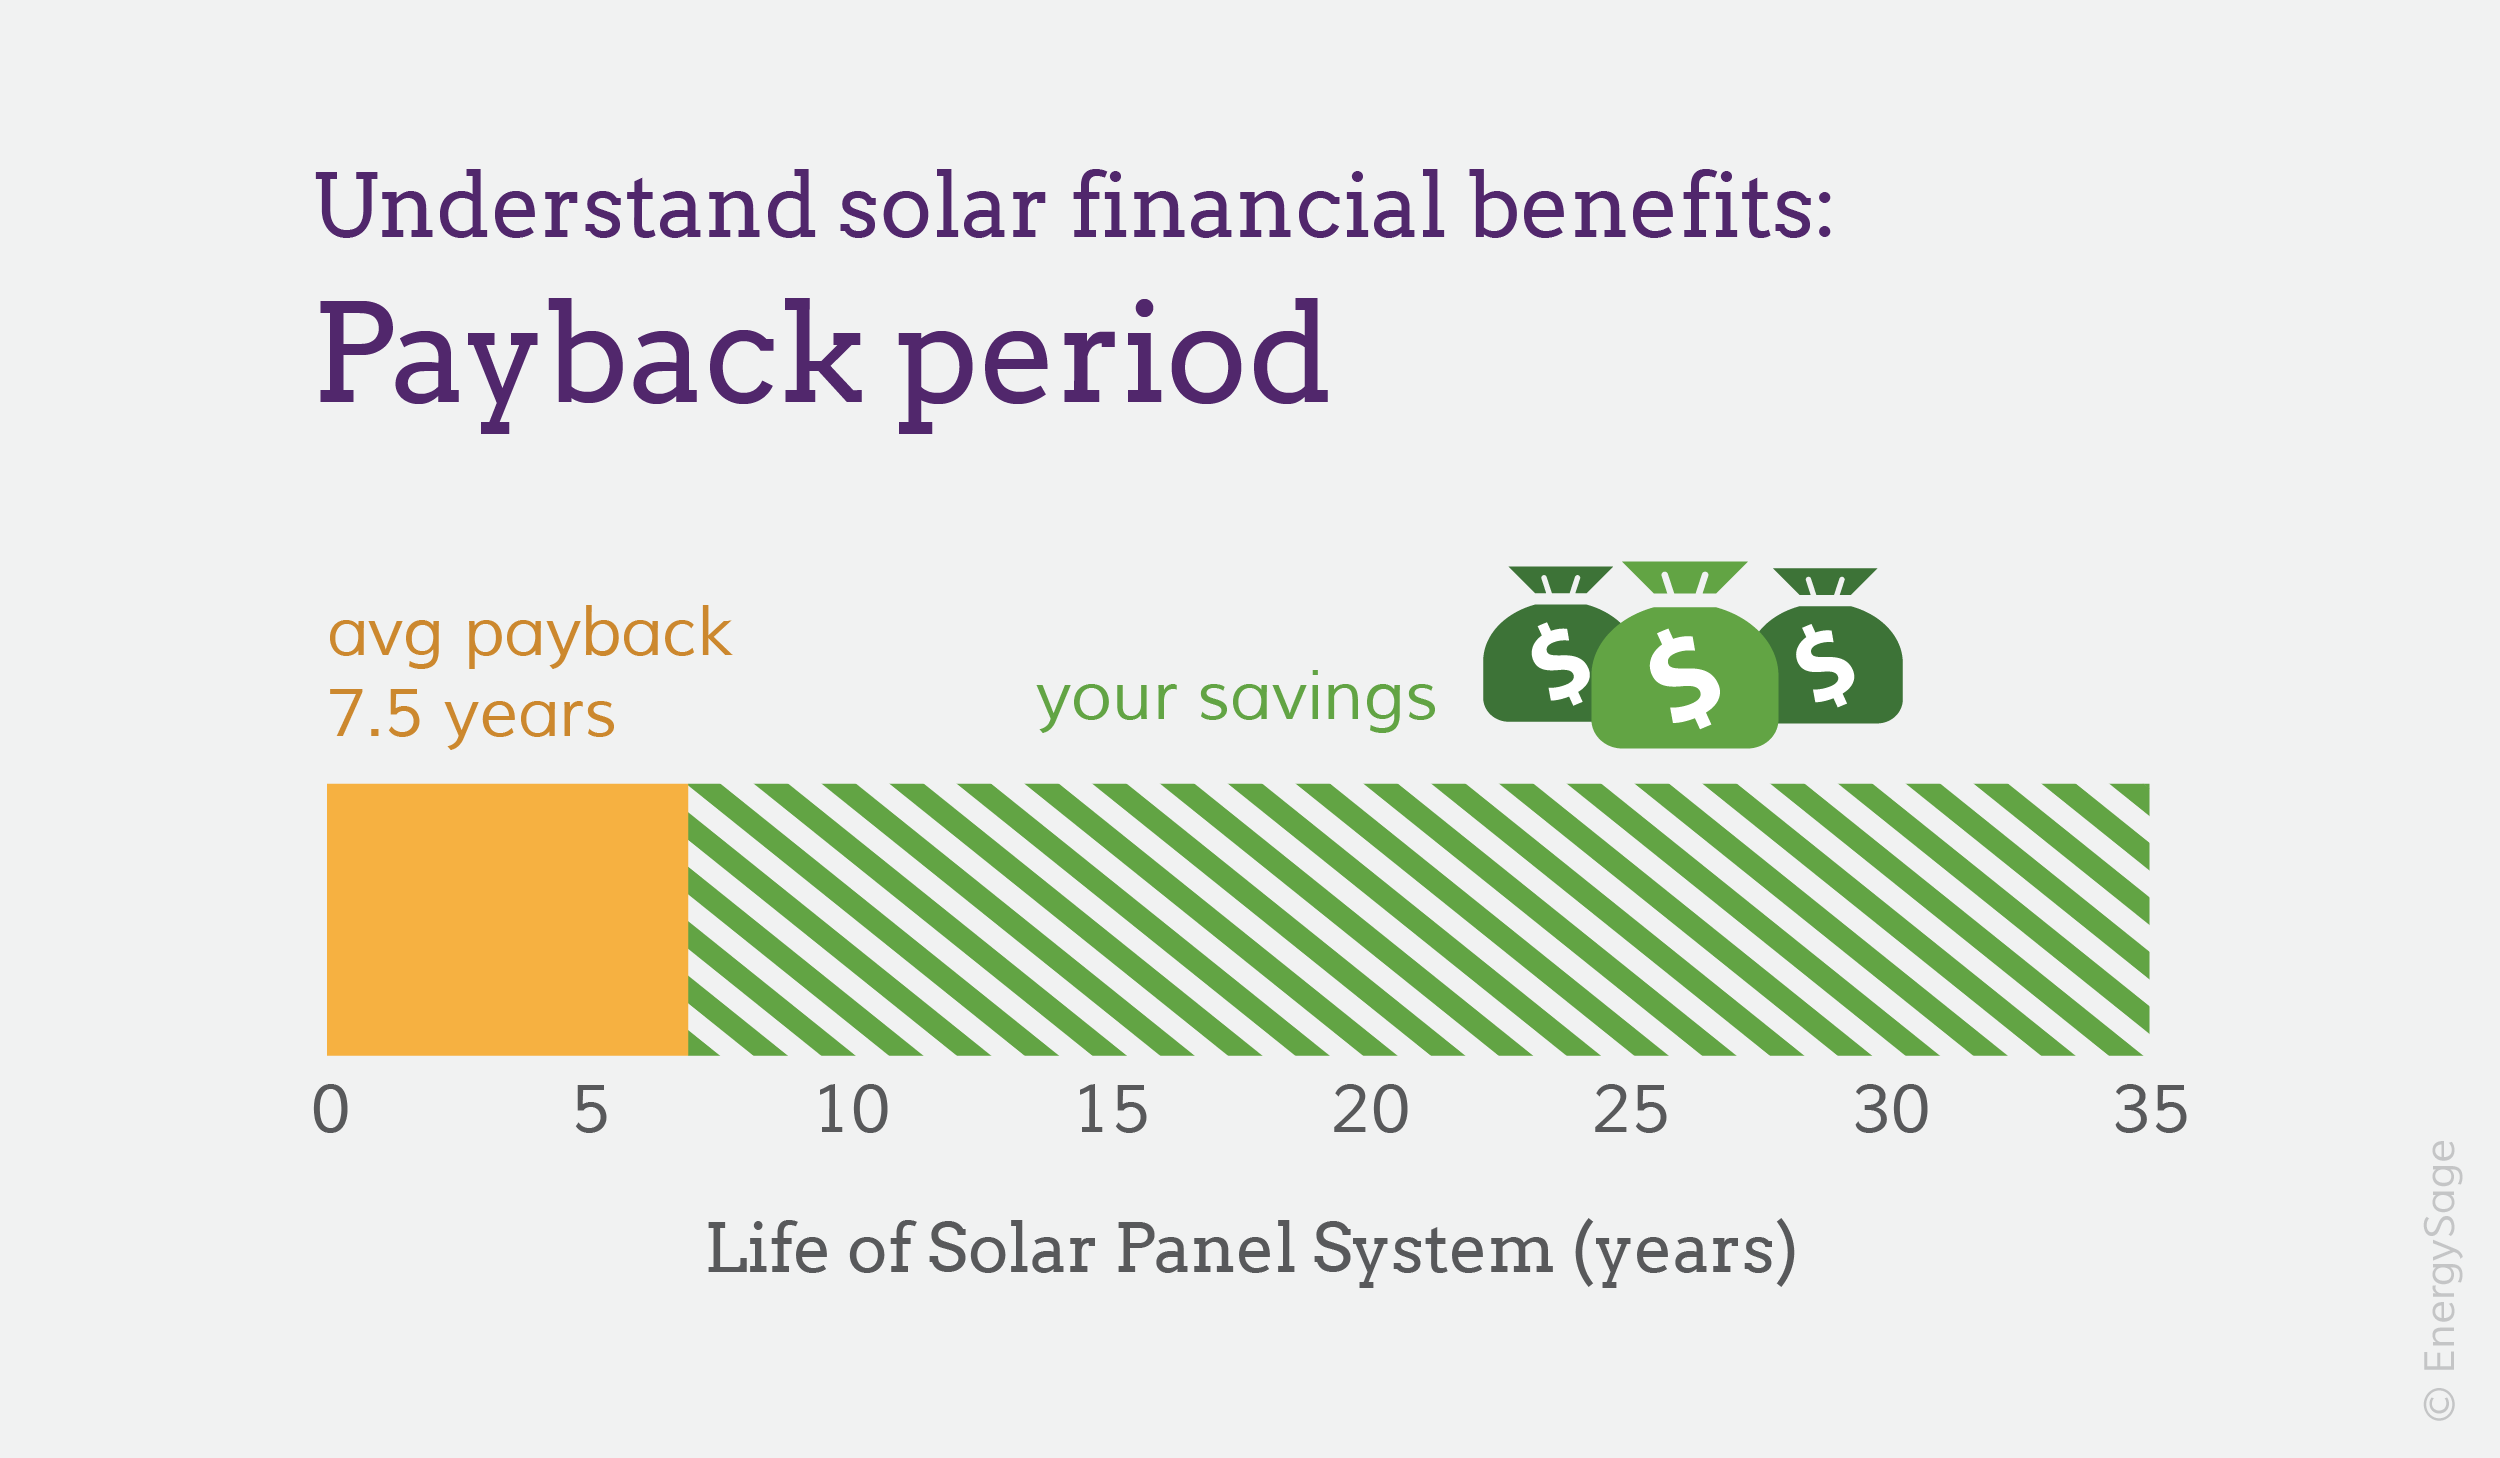 calculate-your-solar-panel-payback-period-energysage